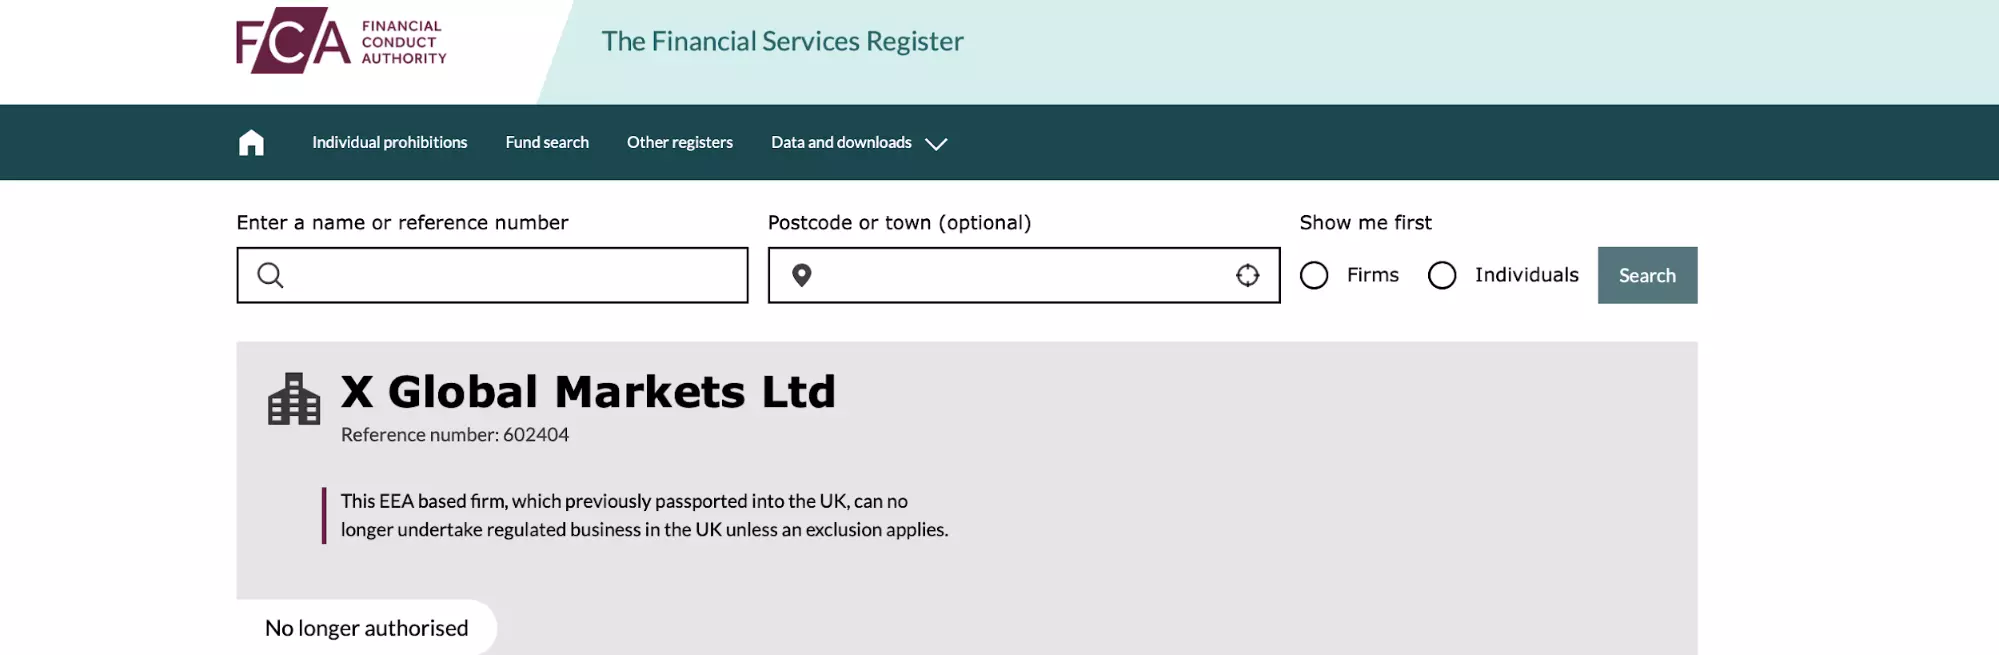 The results of a check in the database of the British regulator FCA